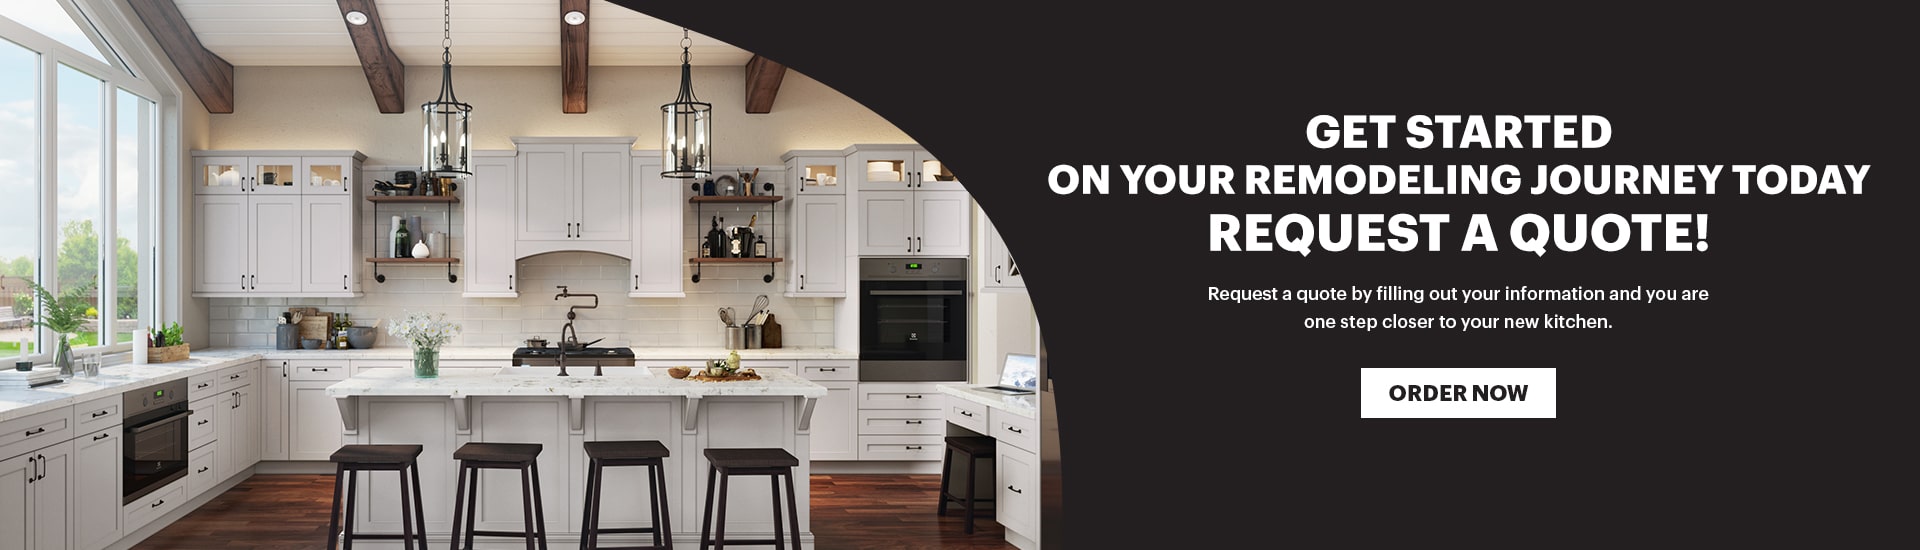 RTA kitchen Cabinets Request a Quote